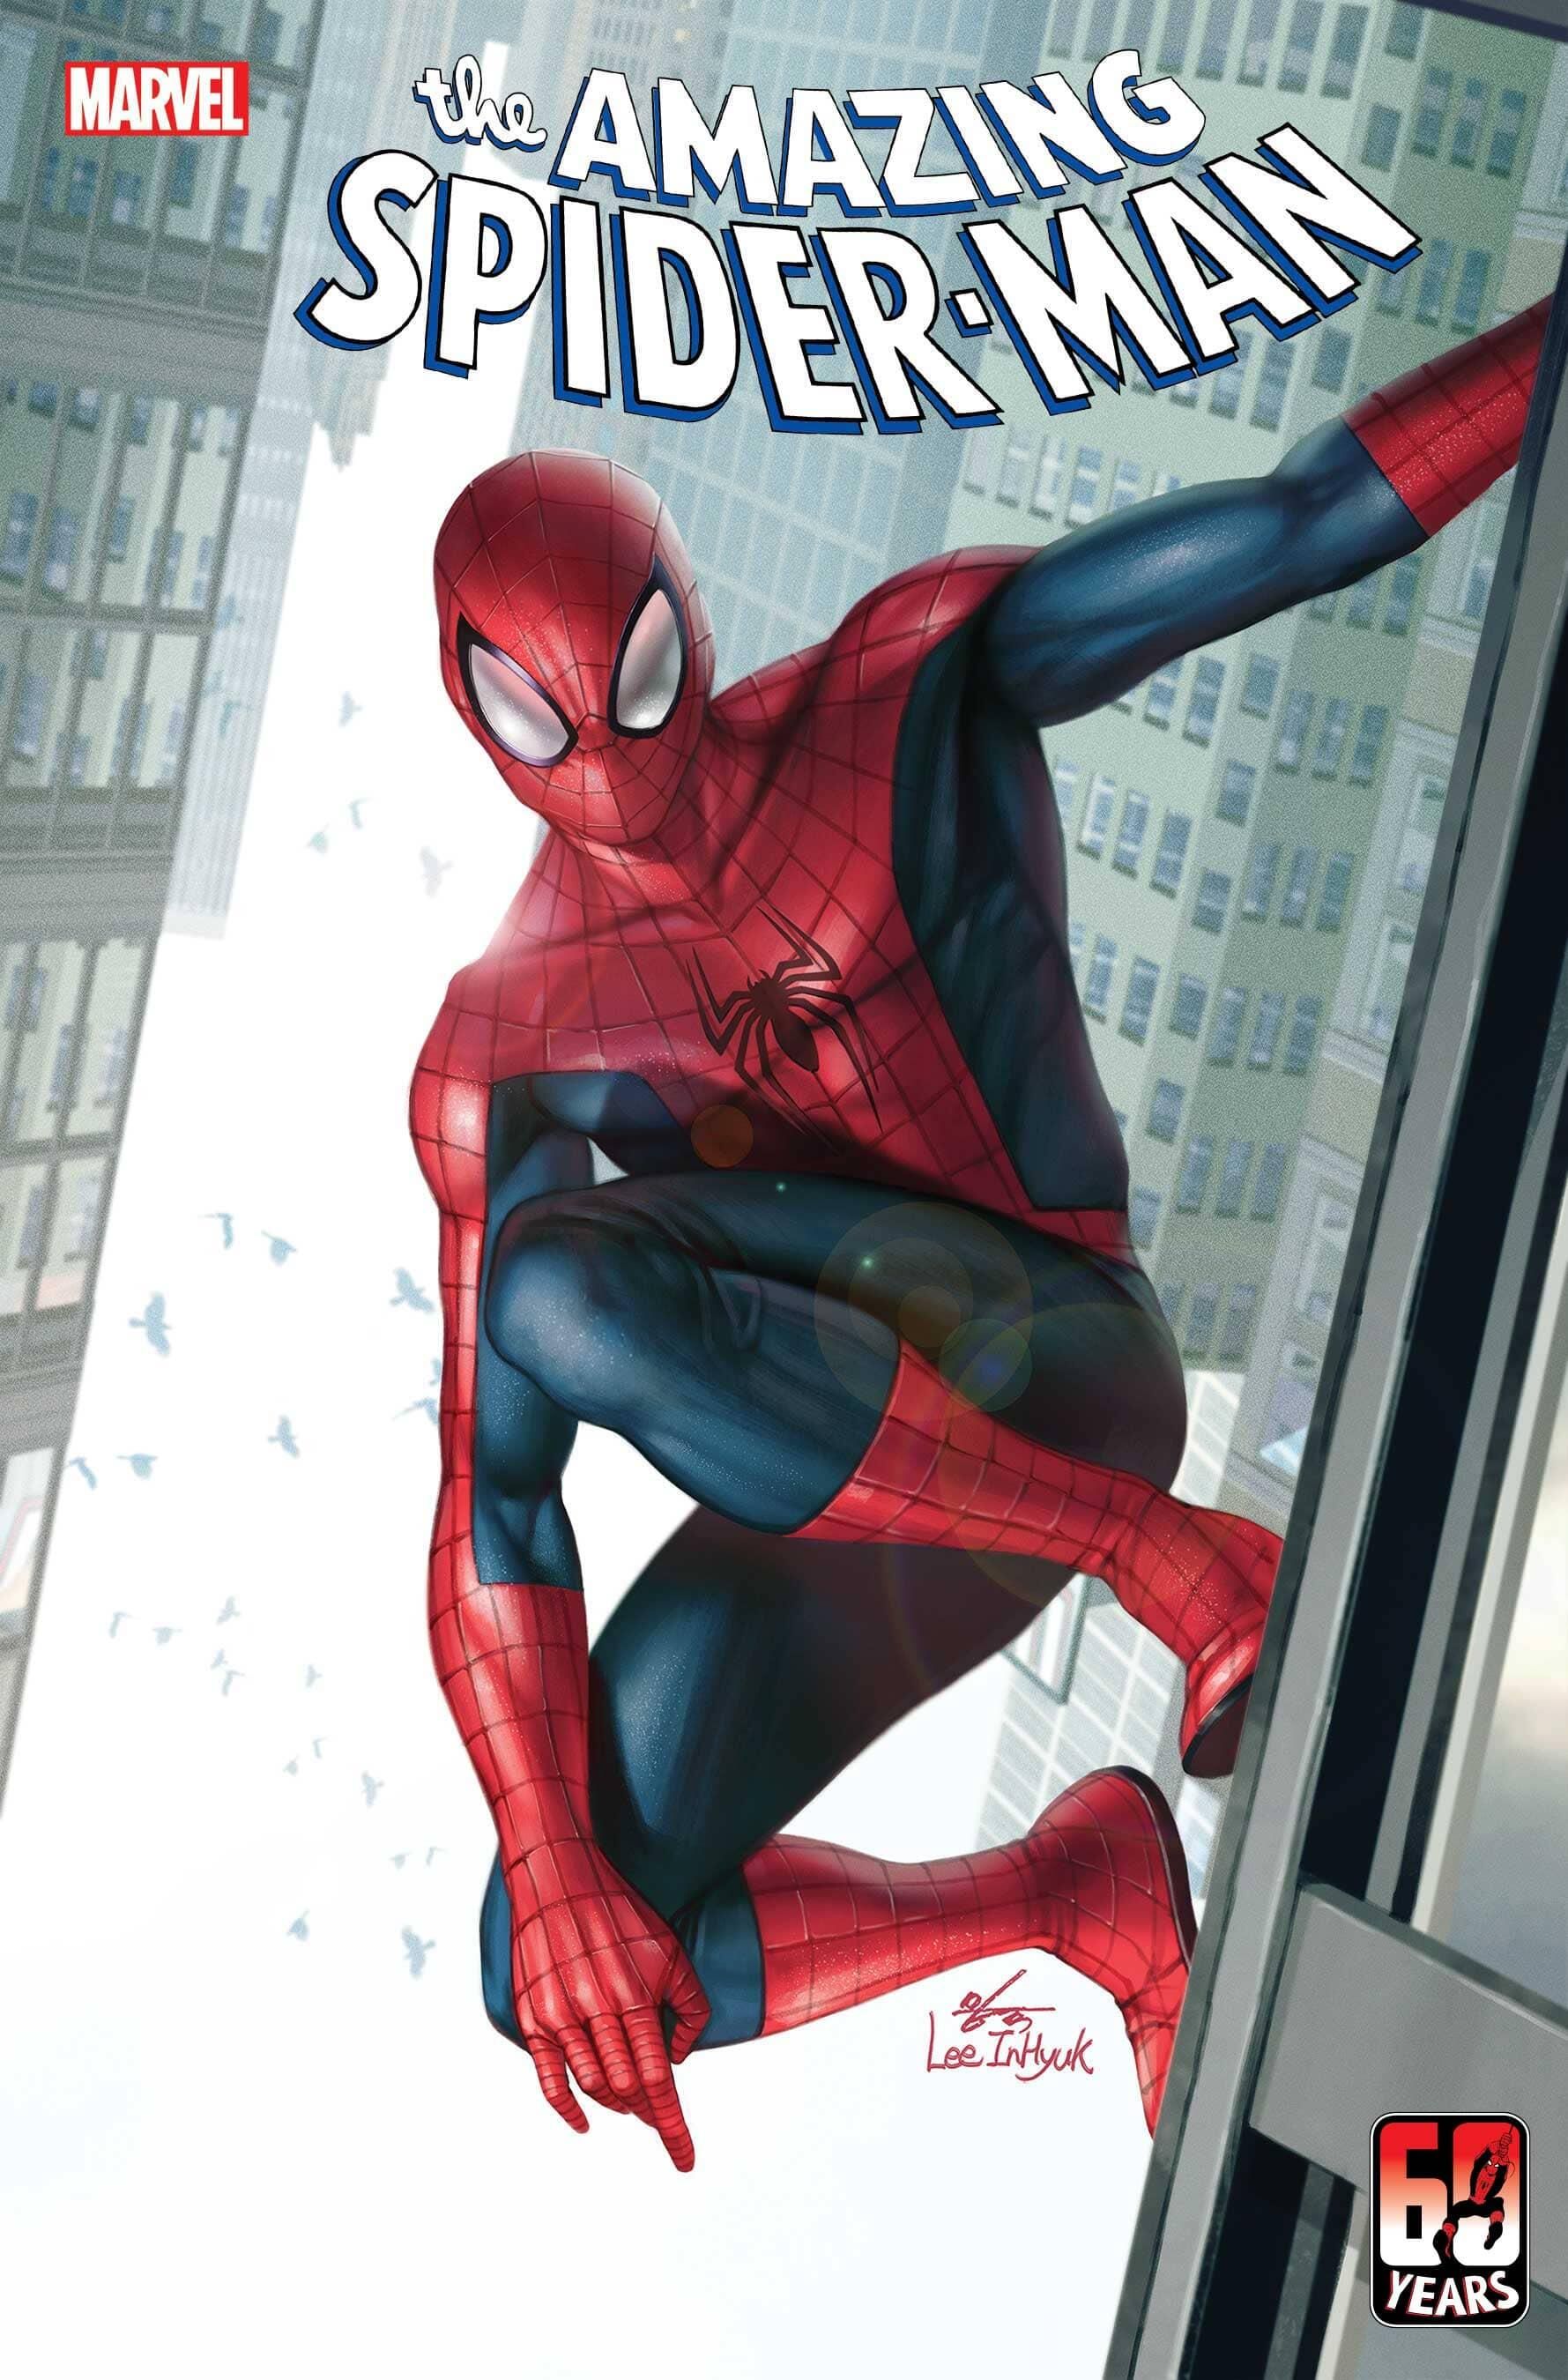 Peter Parker on the cover of Amazing Spider-Man 1 by Inhyuk Lee